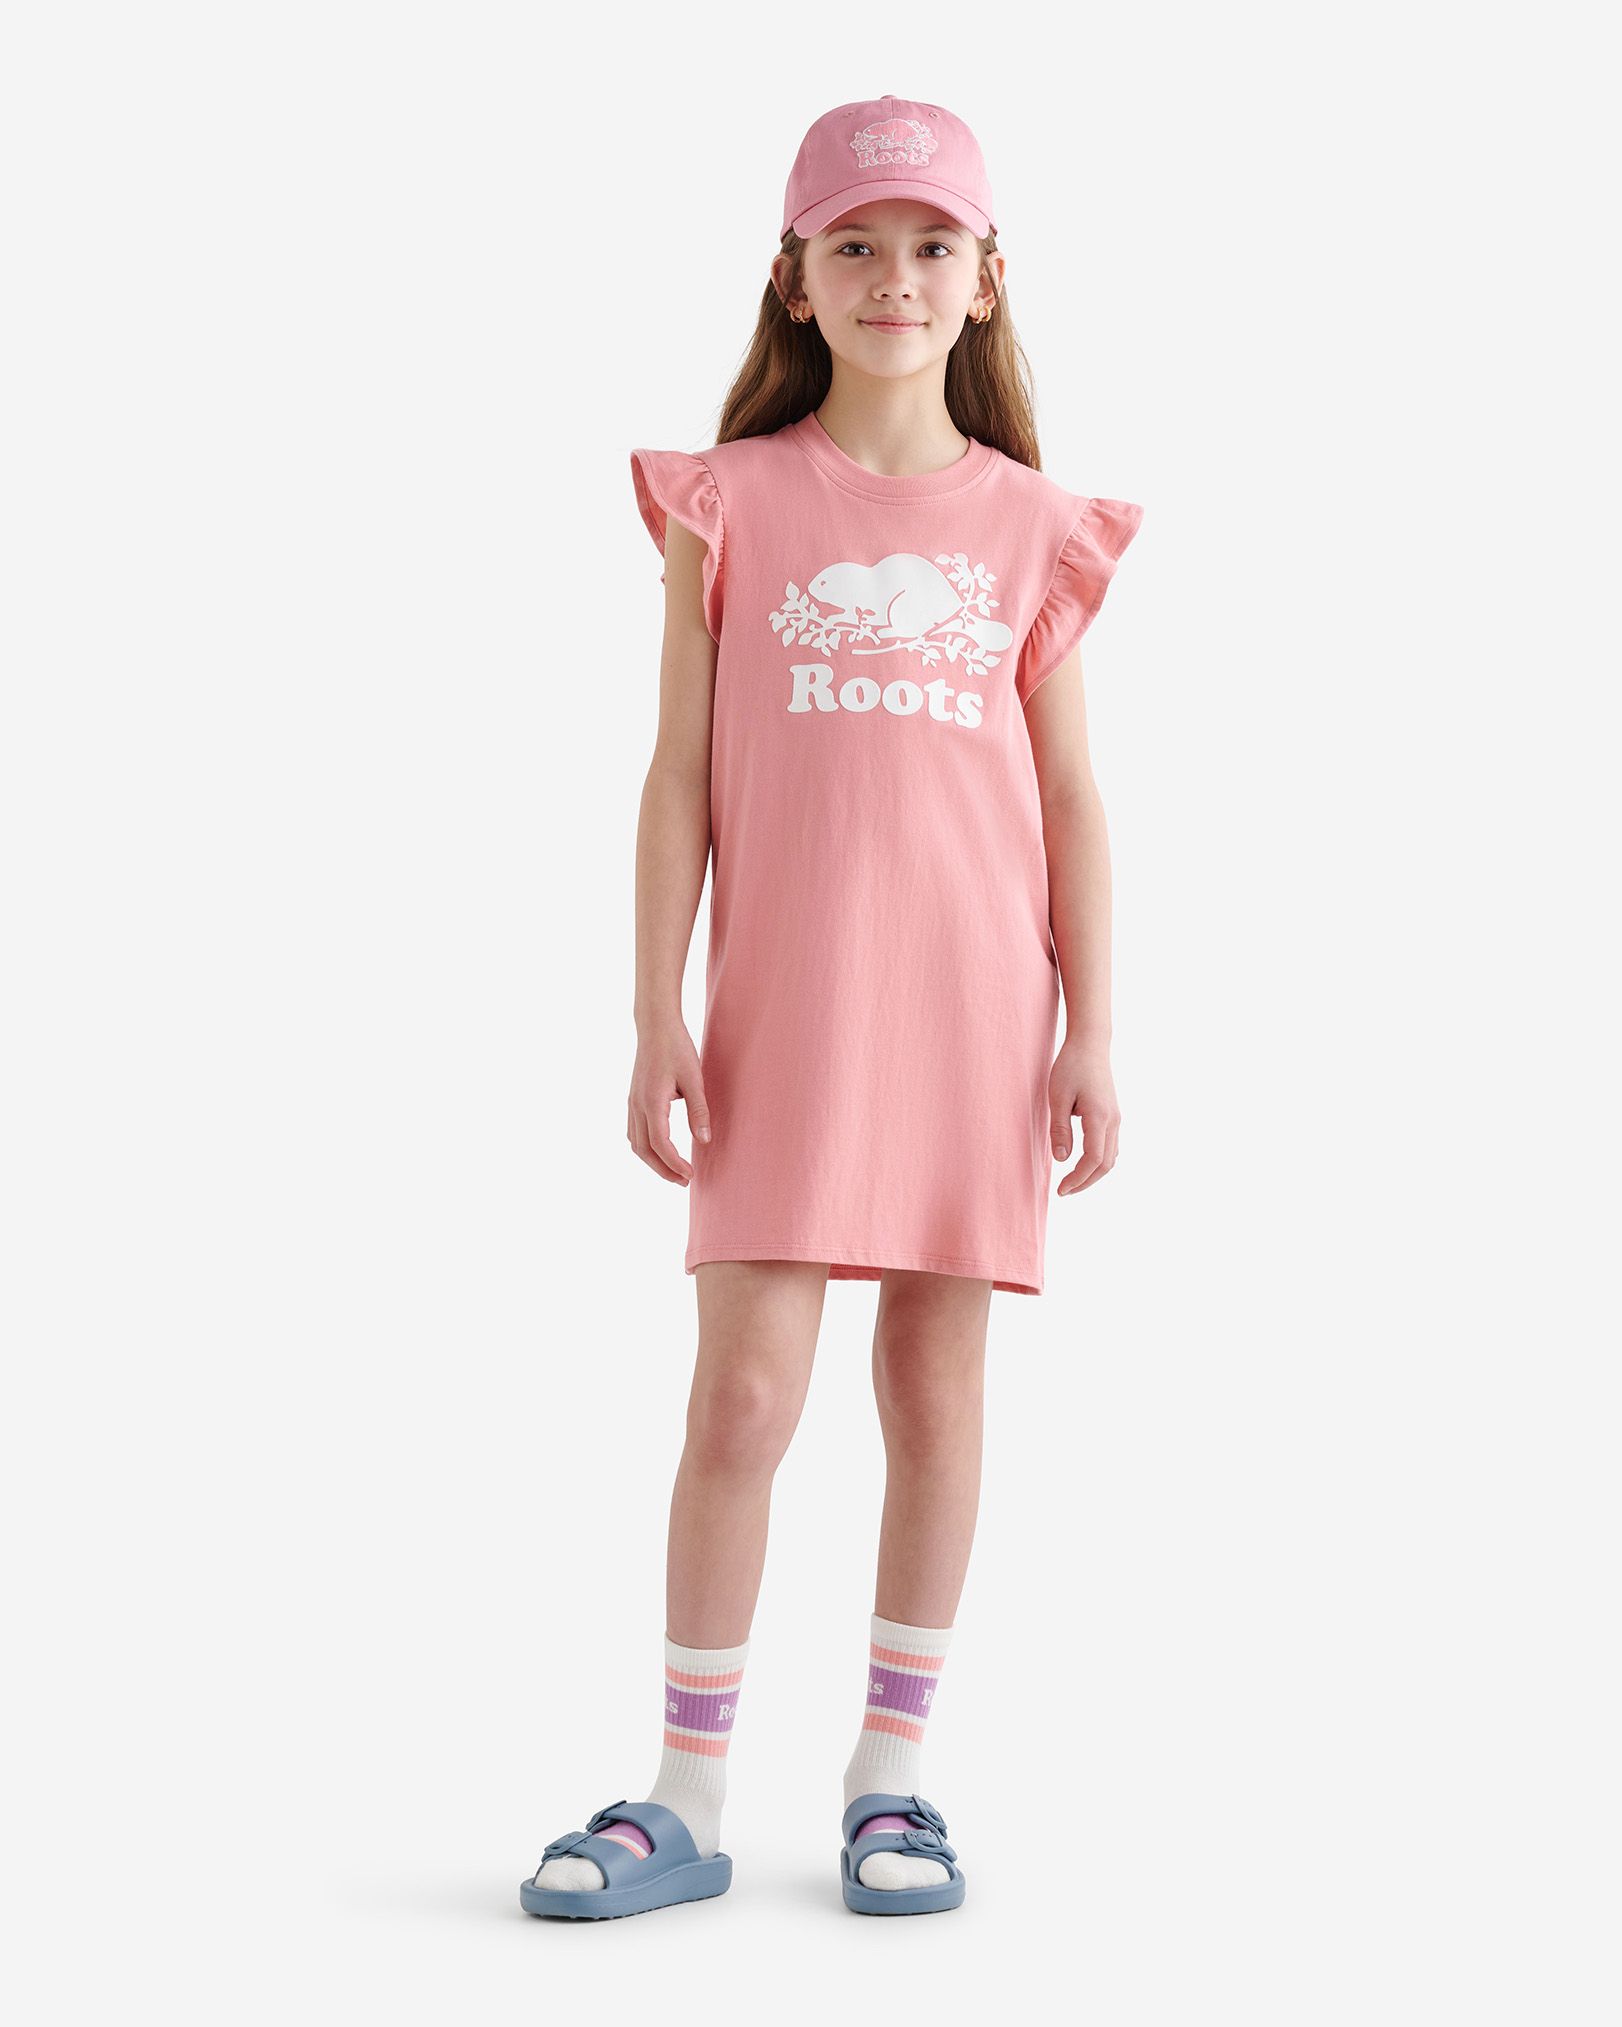 Roots Girl's Cooper Dress in Mauveglow